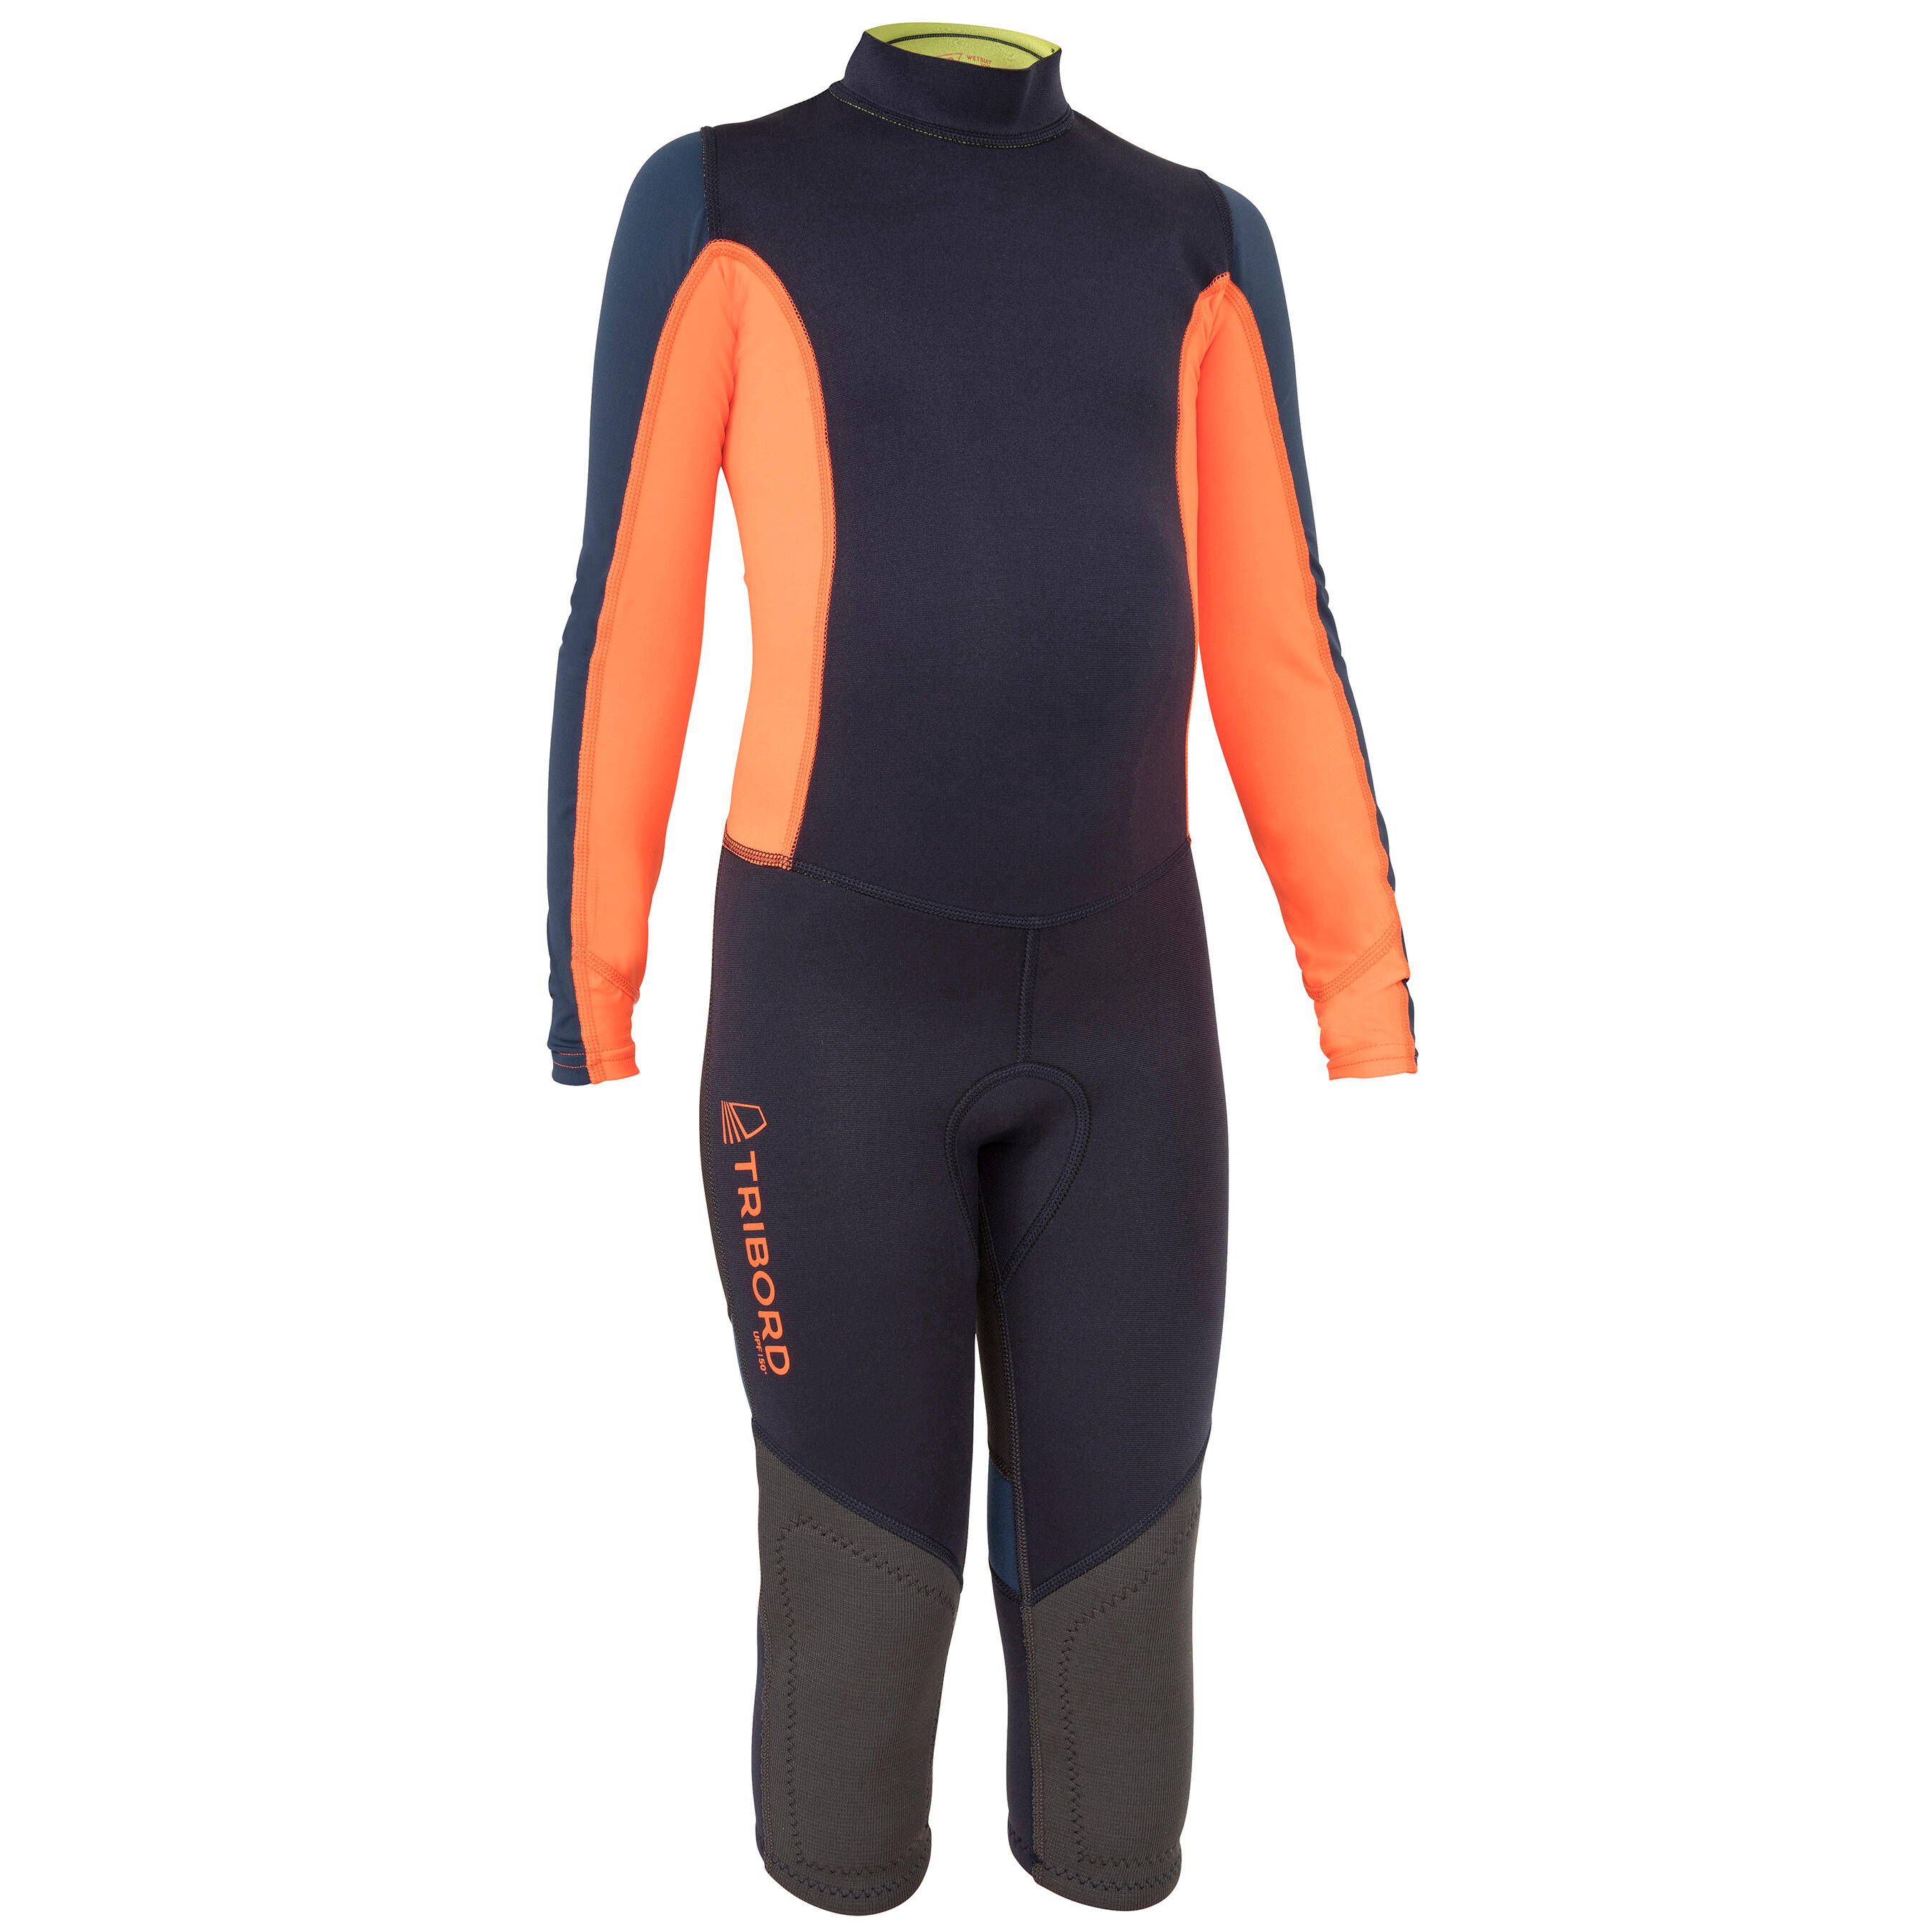 tribord wetsuit